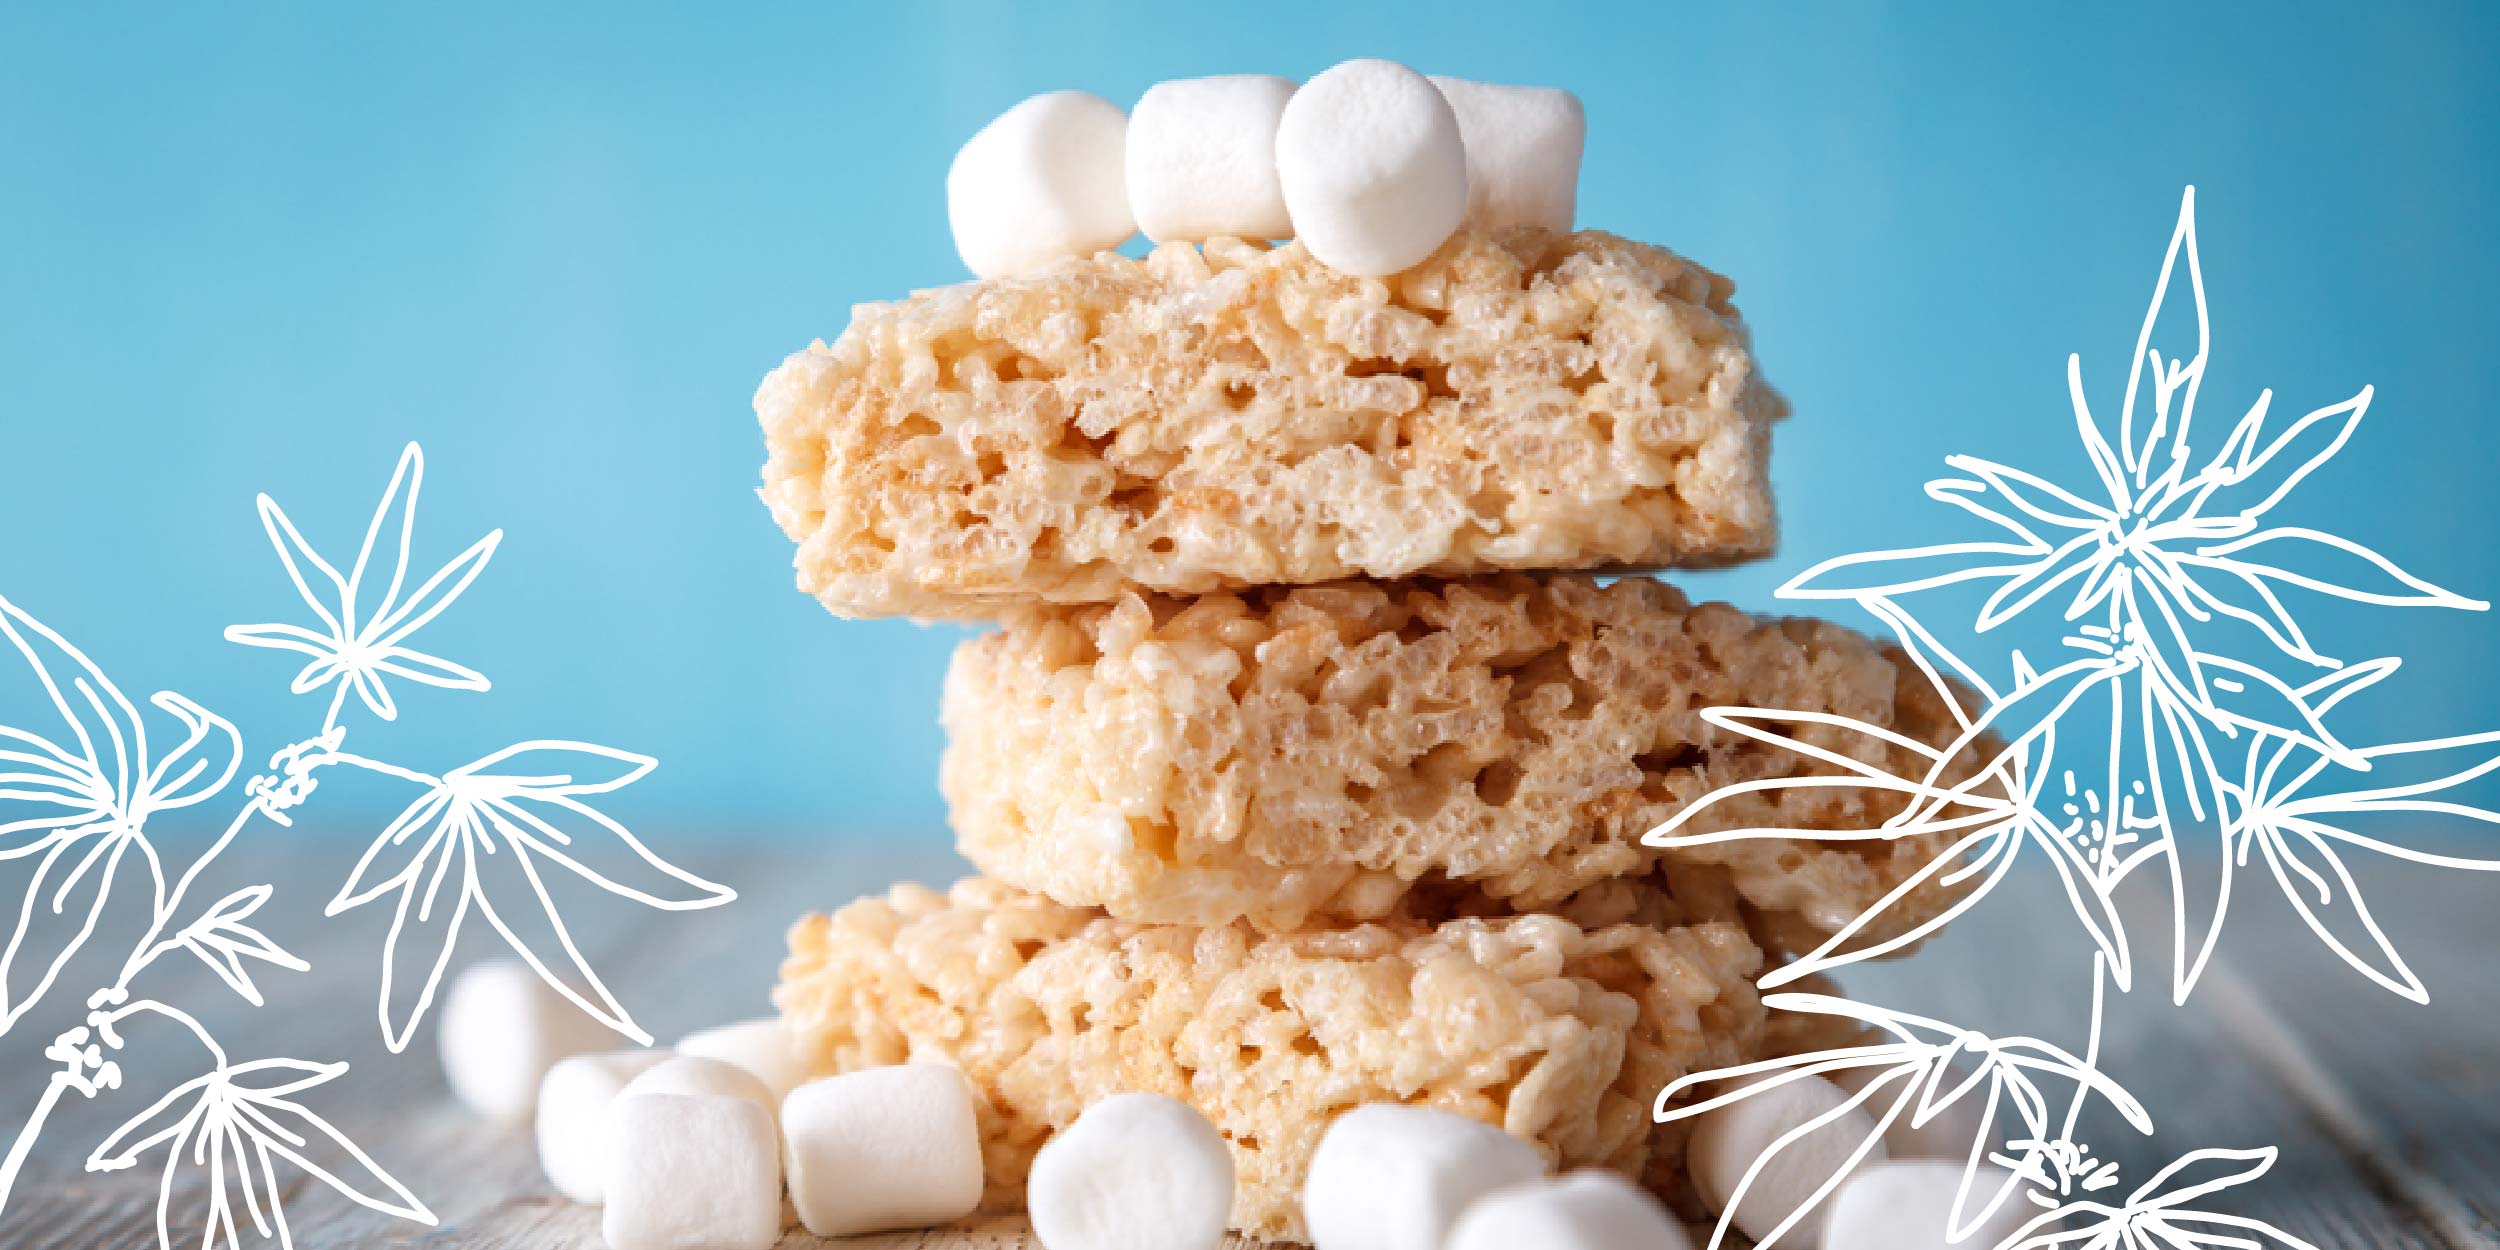 CBD Rice Krispie treats stacked on top of each other.